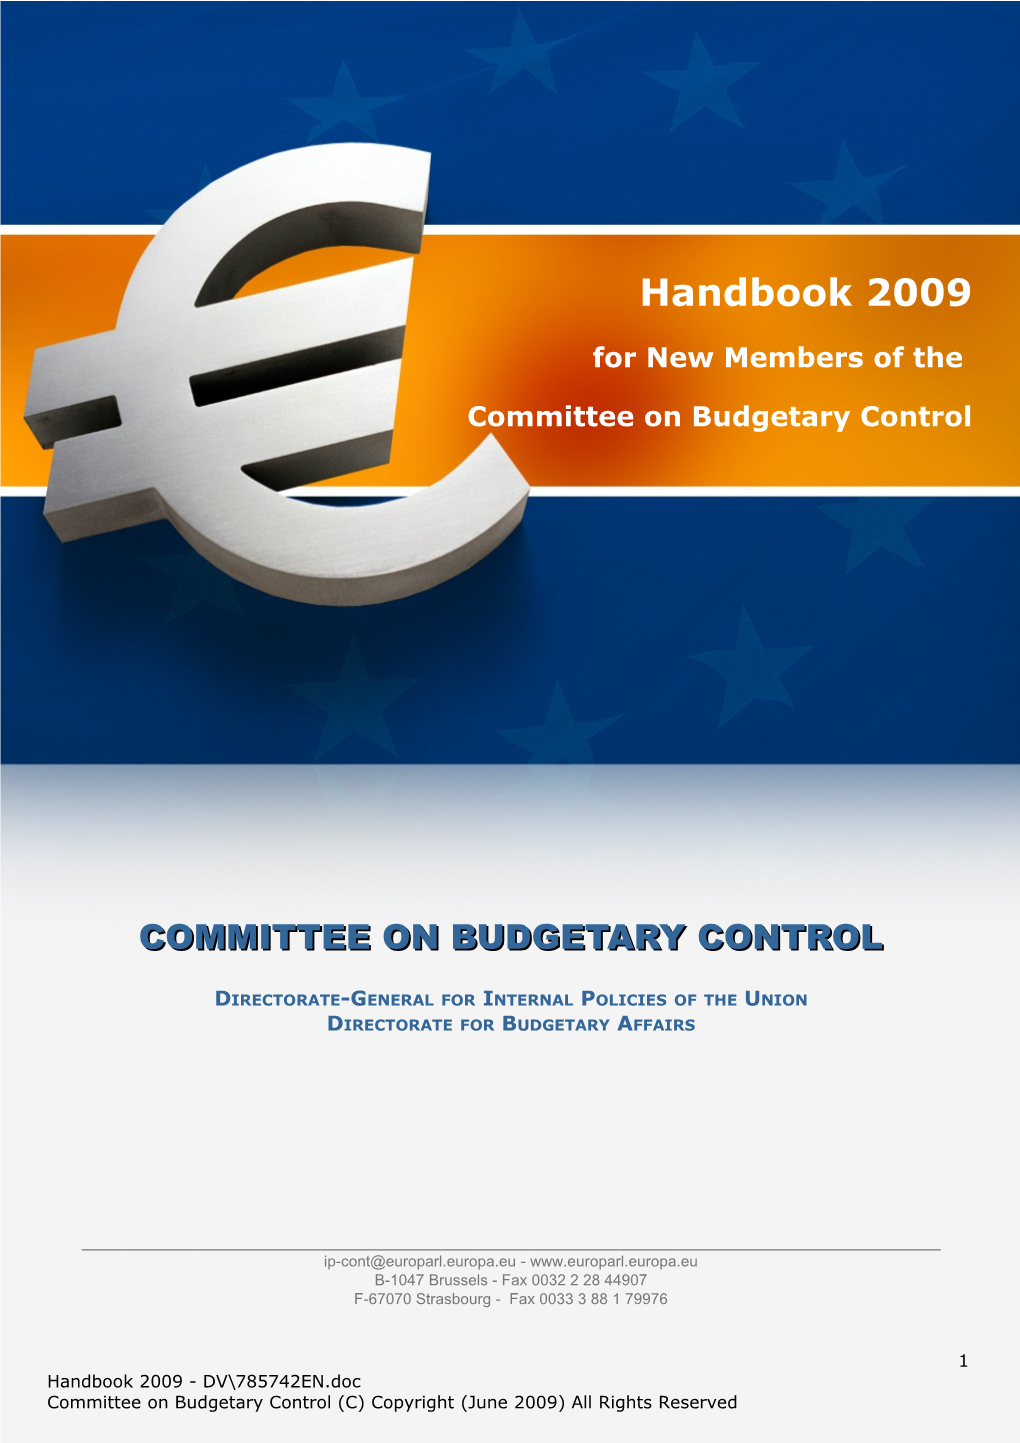 Committee on Budgetary Control